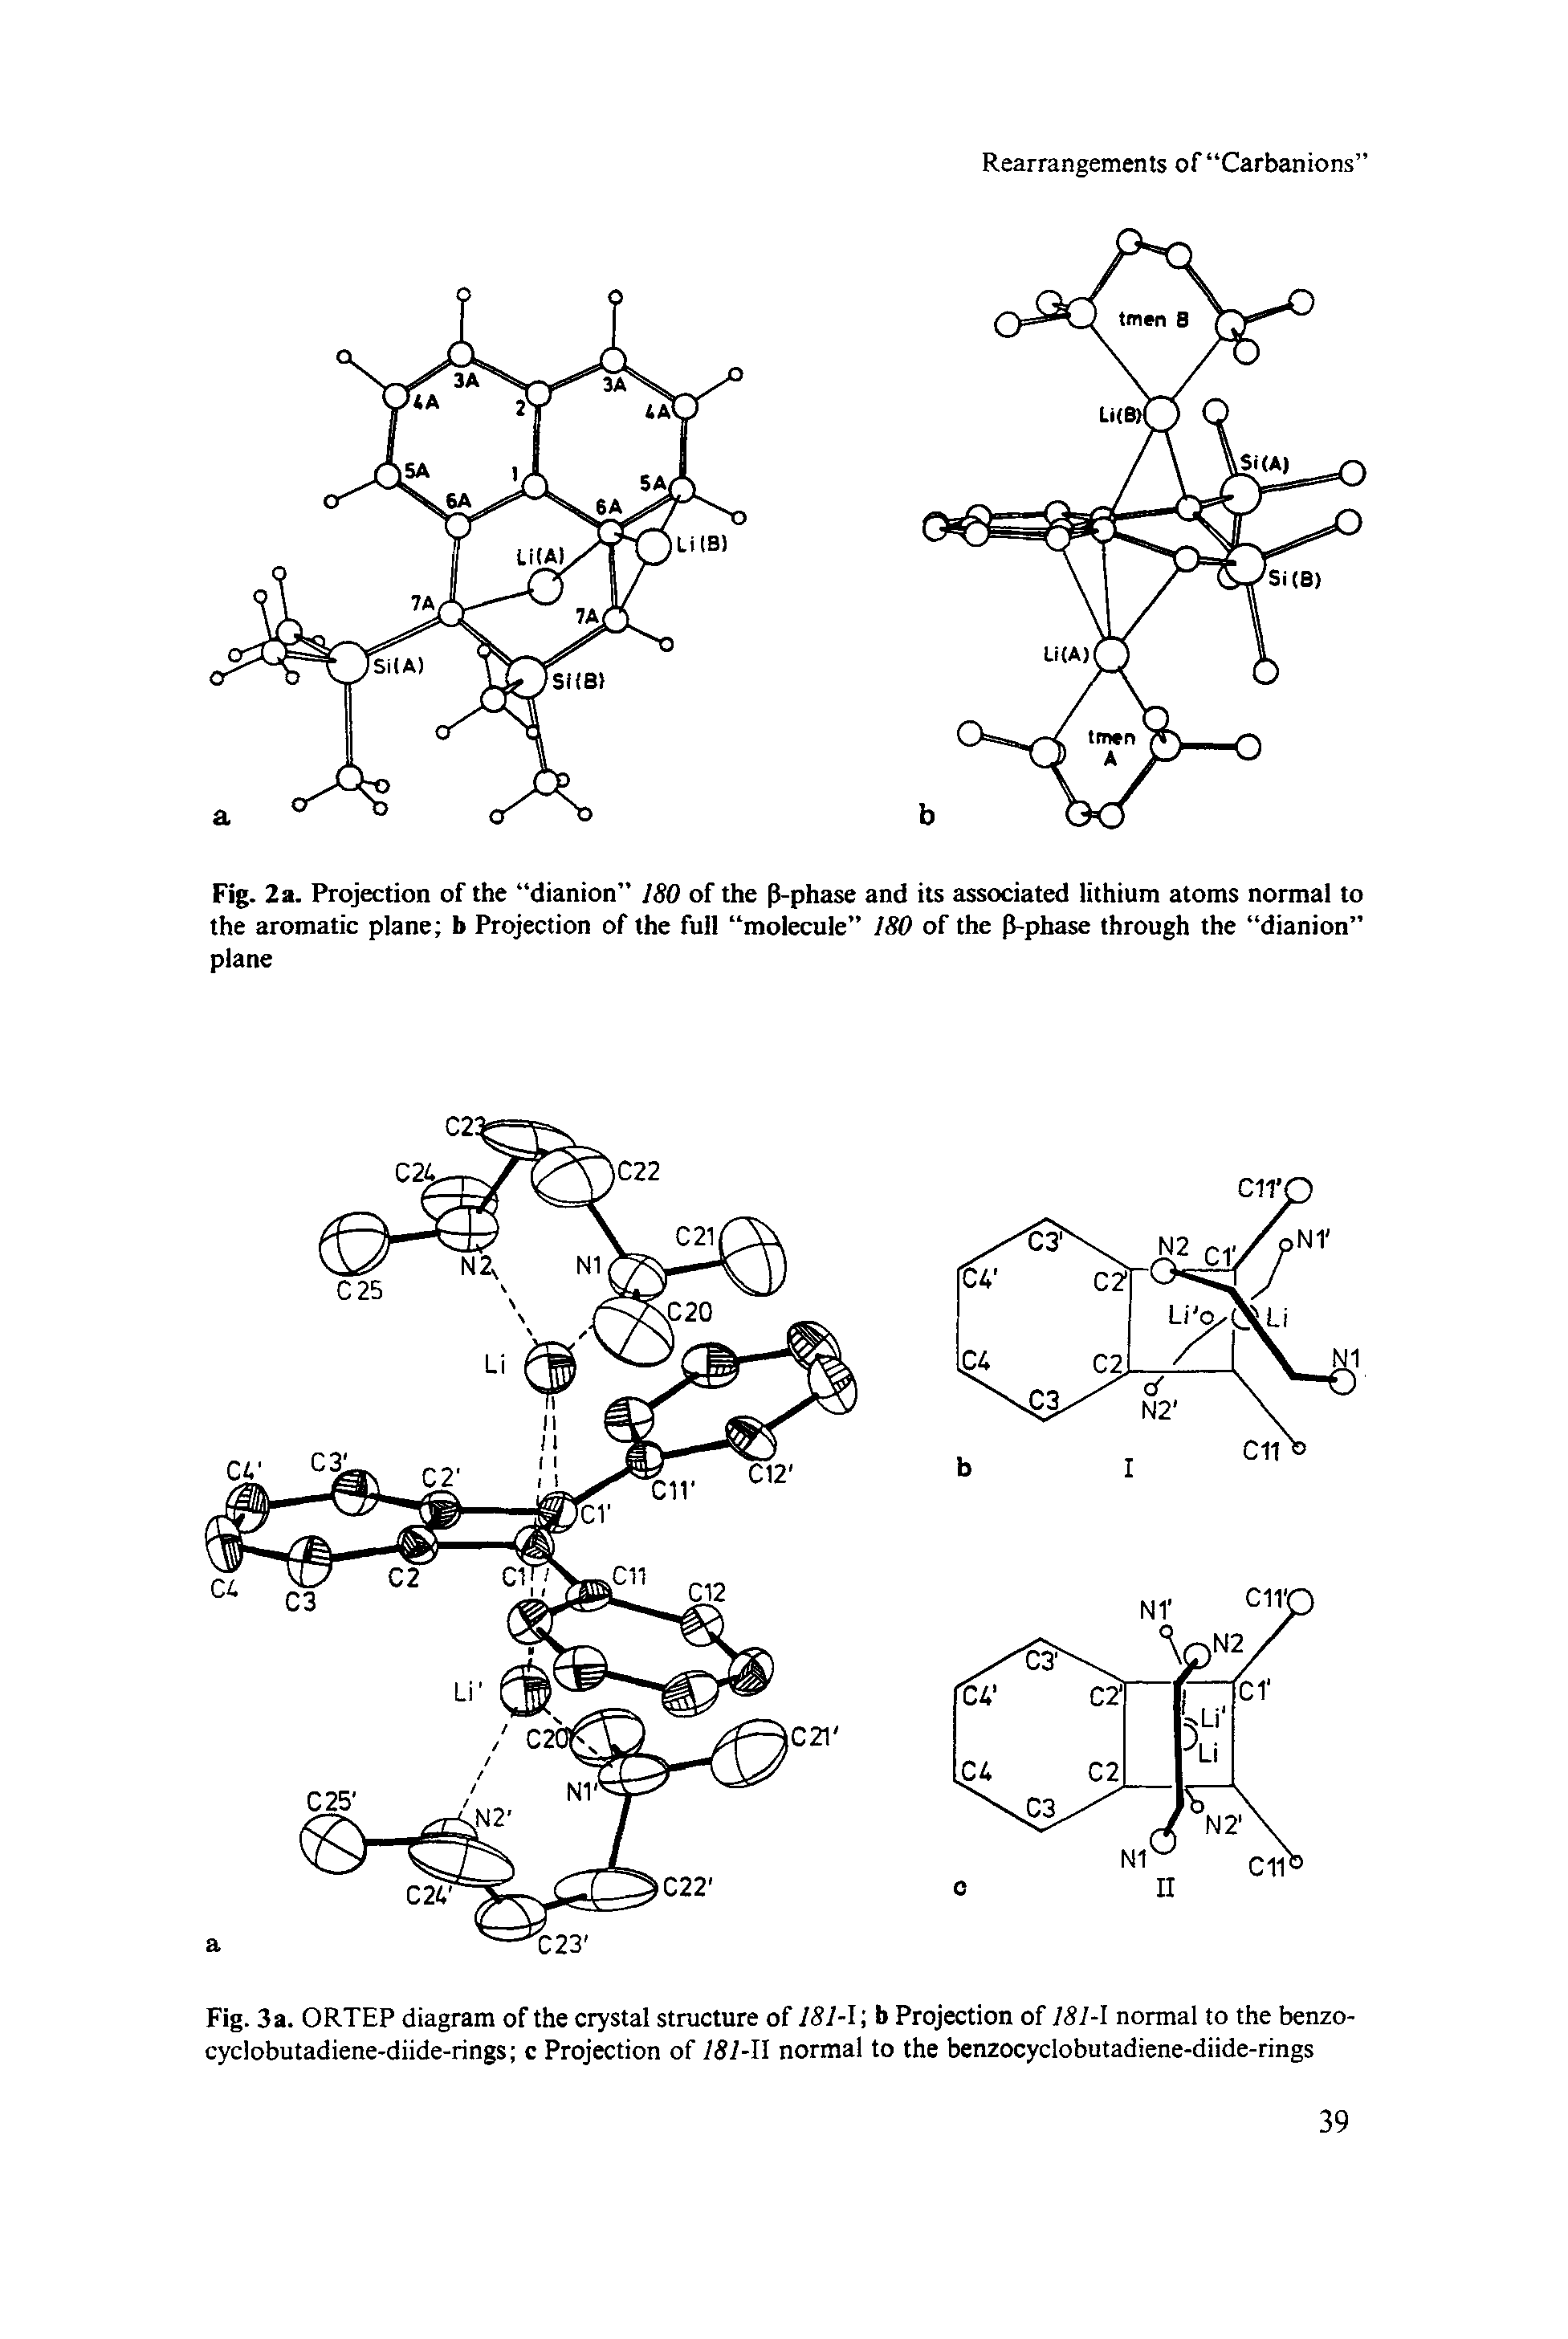 Fig. 3a. ORTEP diagram of the crystal structure of 181-1 b Projection of 181-1 normal to the benzo-cyclobutadiene-diide-rings c Projection of 181-11 normal to the benzocyclobutadiene-diide-rings...